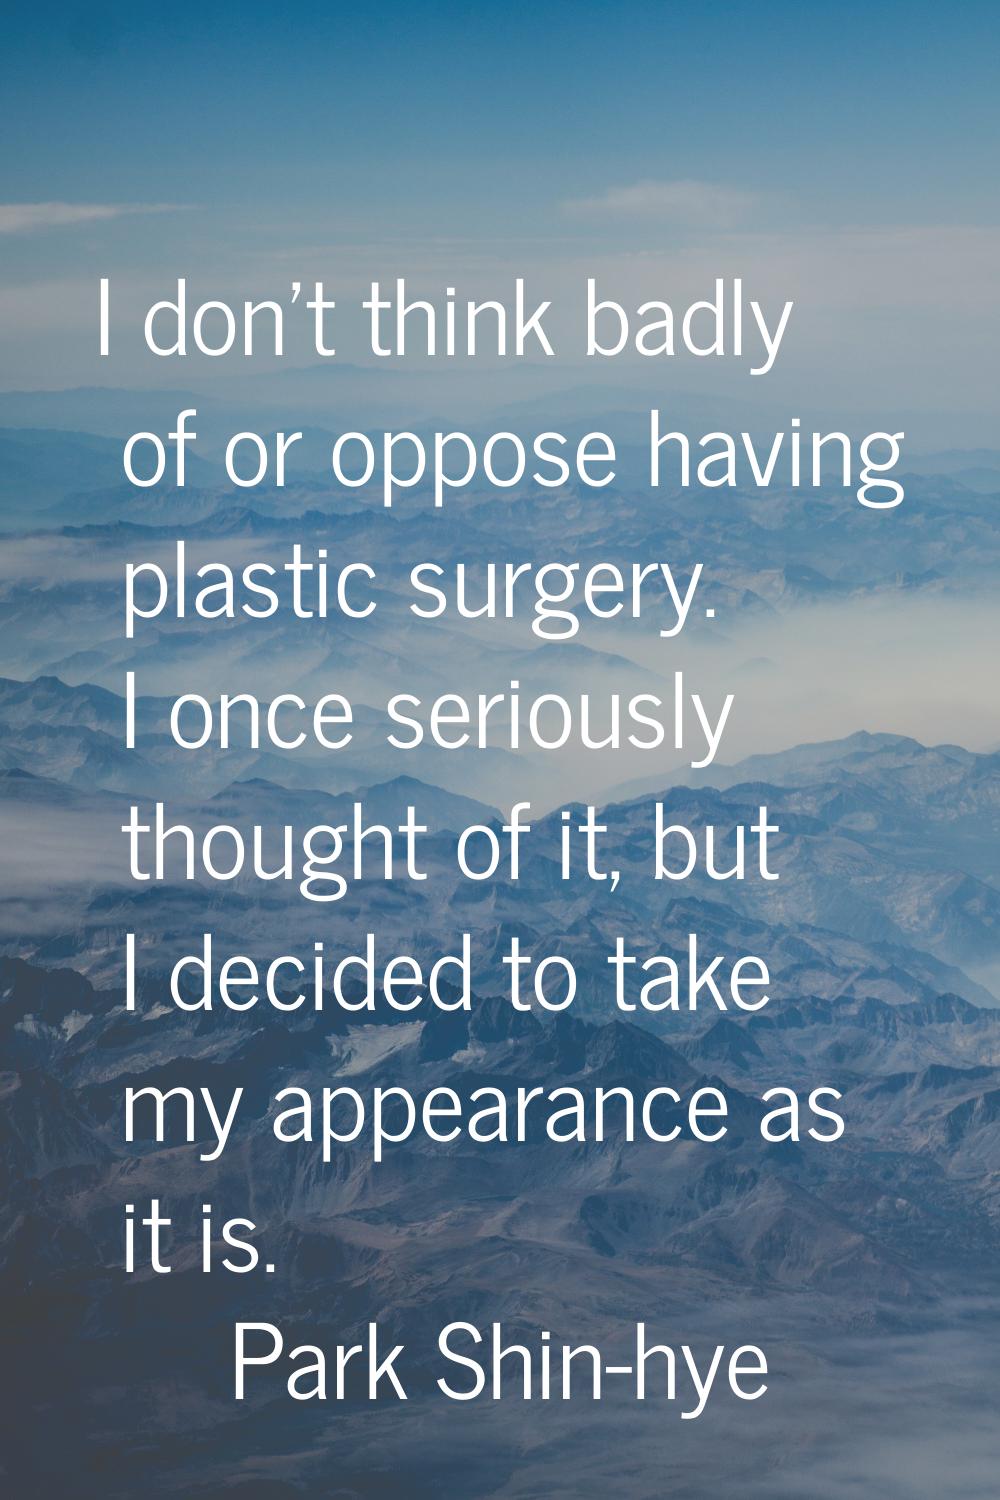 I don't think badly of or oppose having plastic surgery. I once seriously thought of it, but I deci